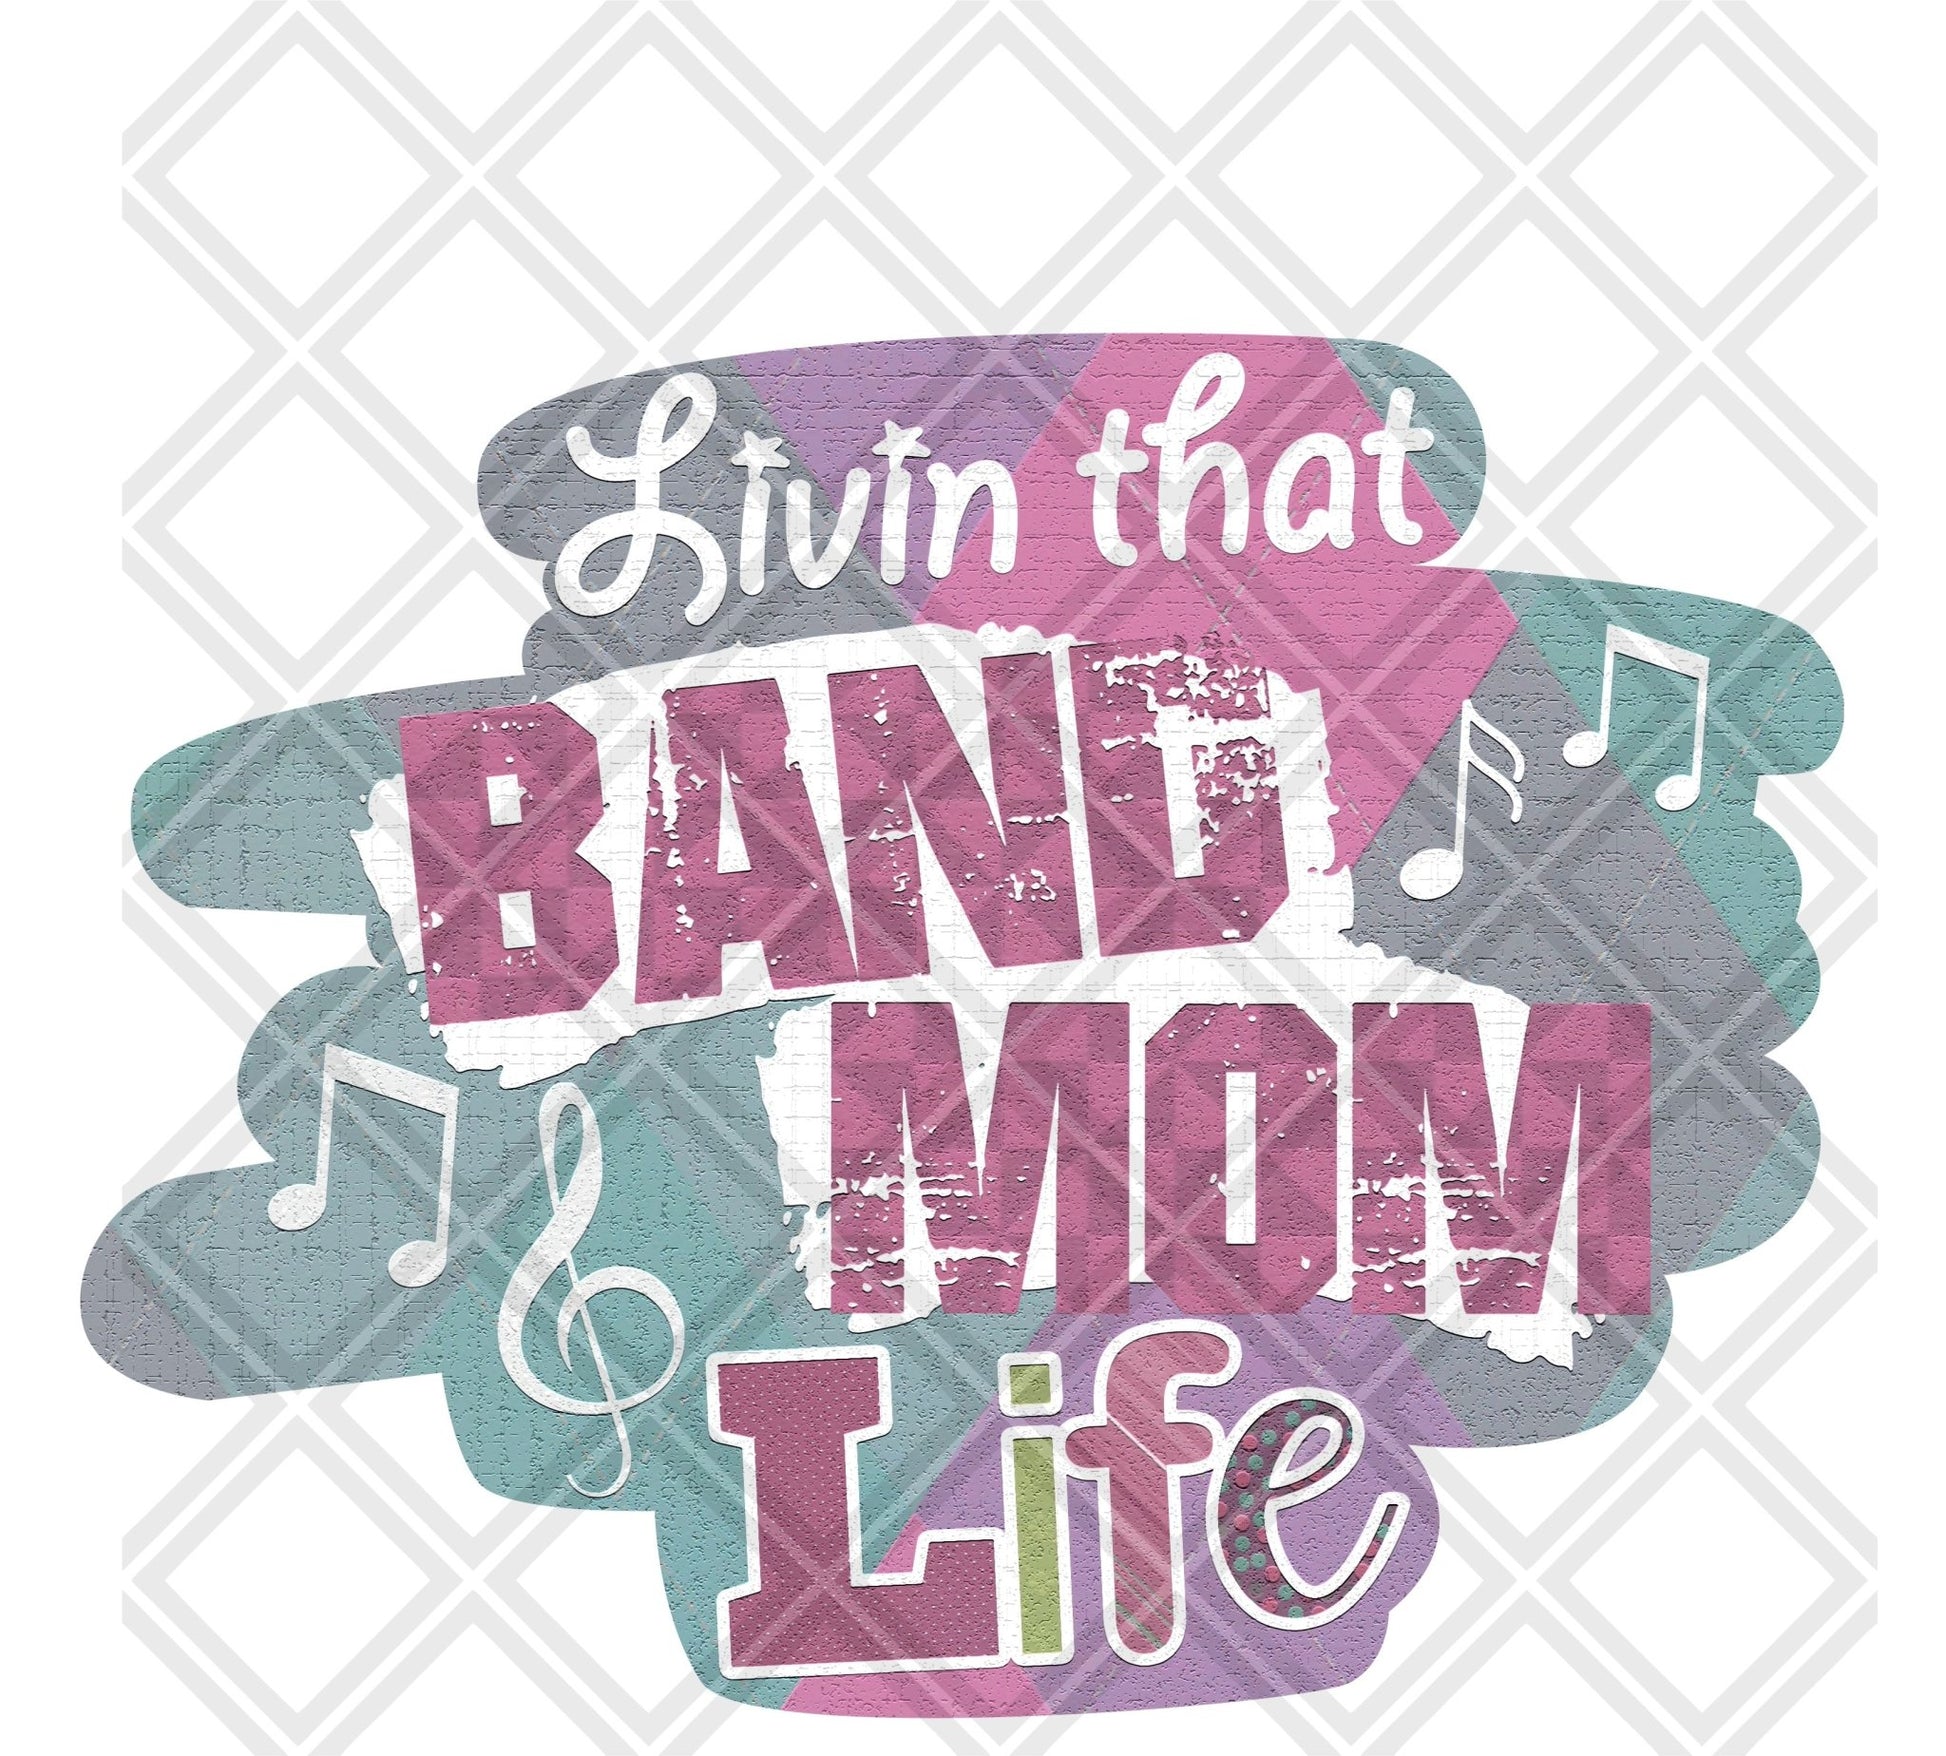 Livin that brand mom life DTF TRANSFERPRINT TO ORDER - Do it yourself Transfers